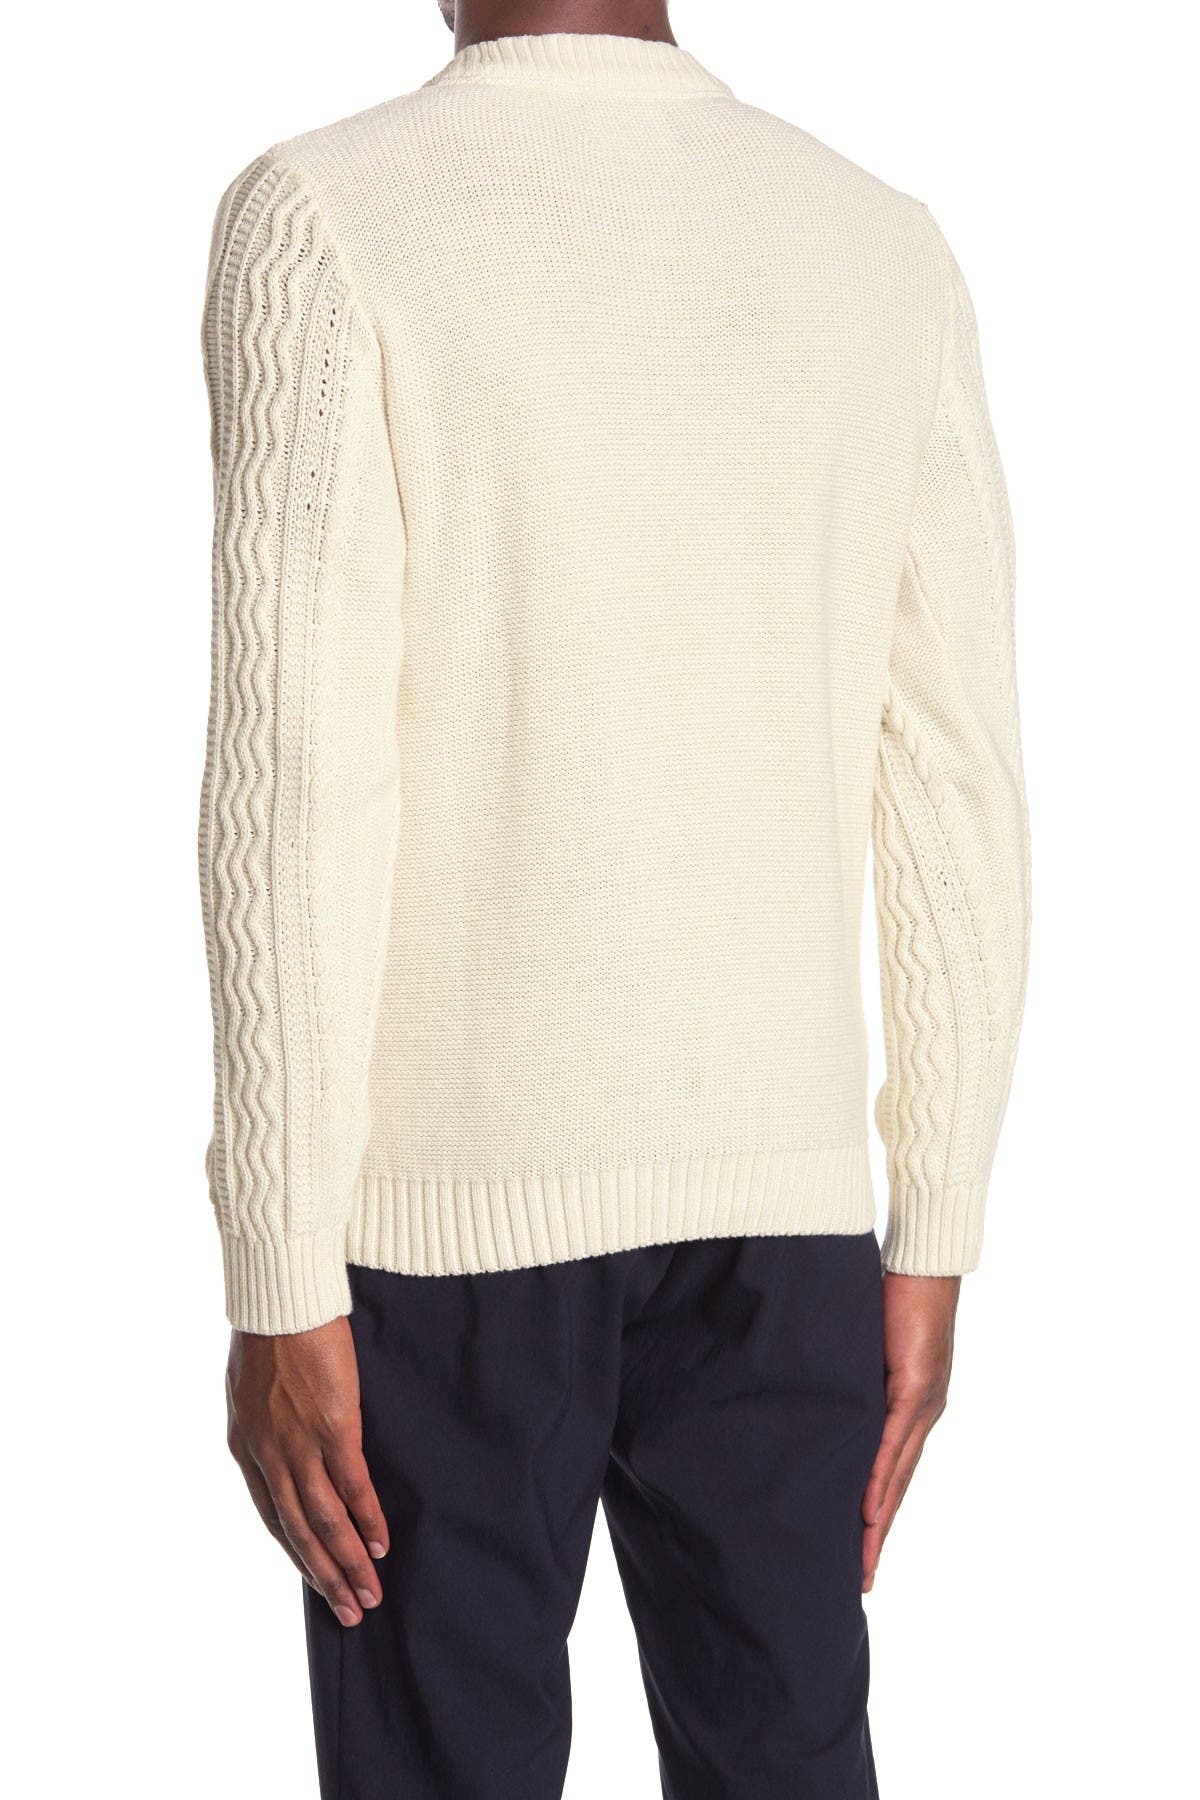 SOUL OF LONDON | Cable Knit Pullover Sweater | Nordstrom Rack